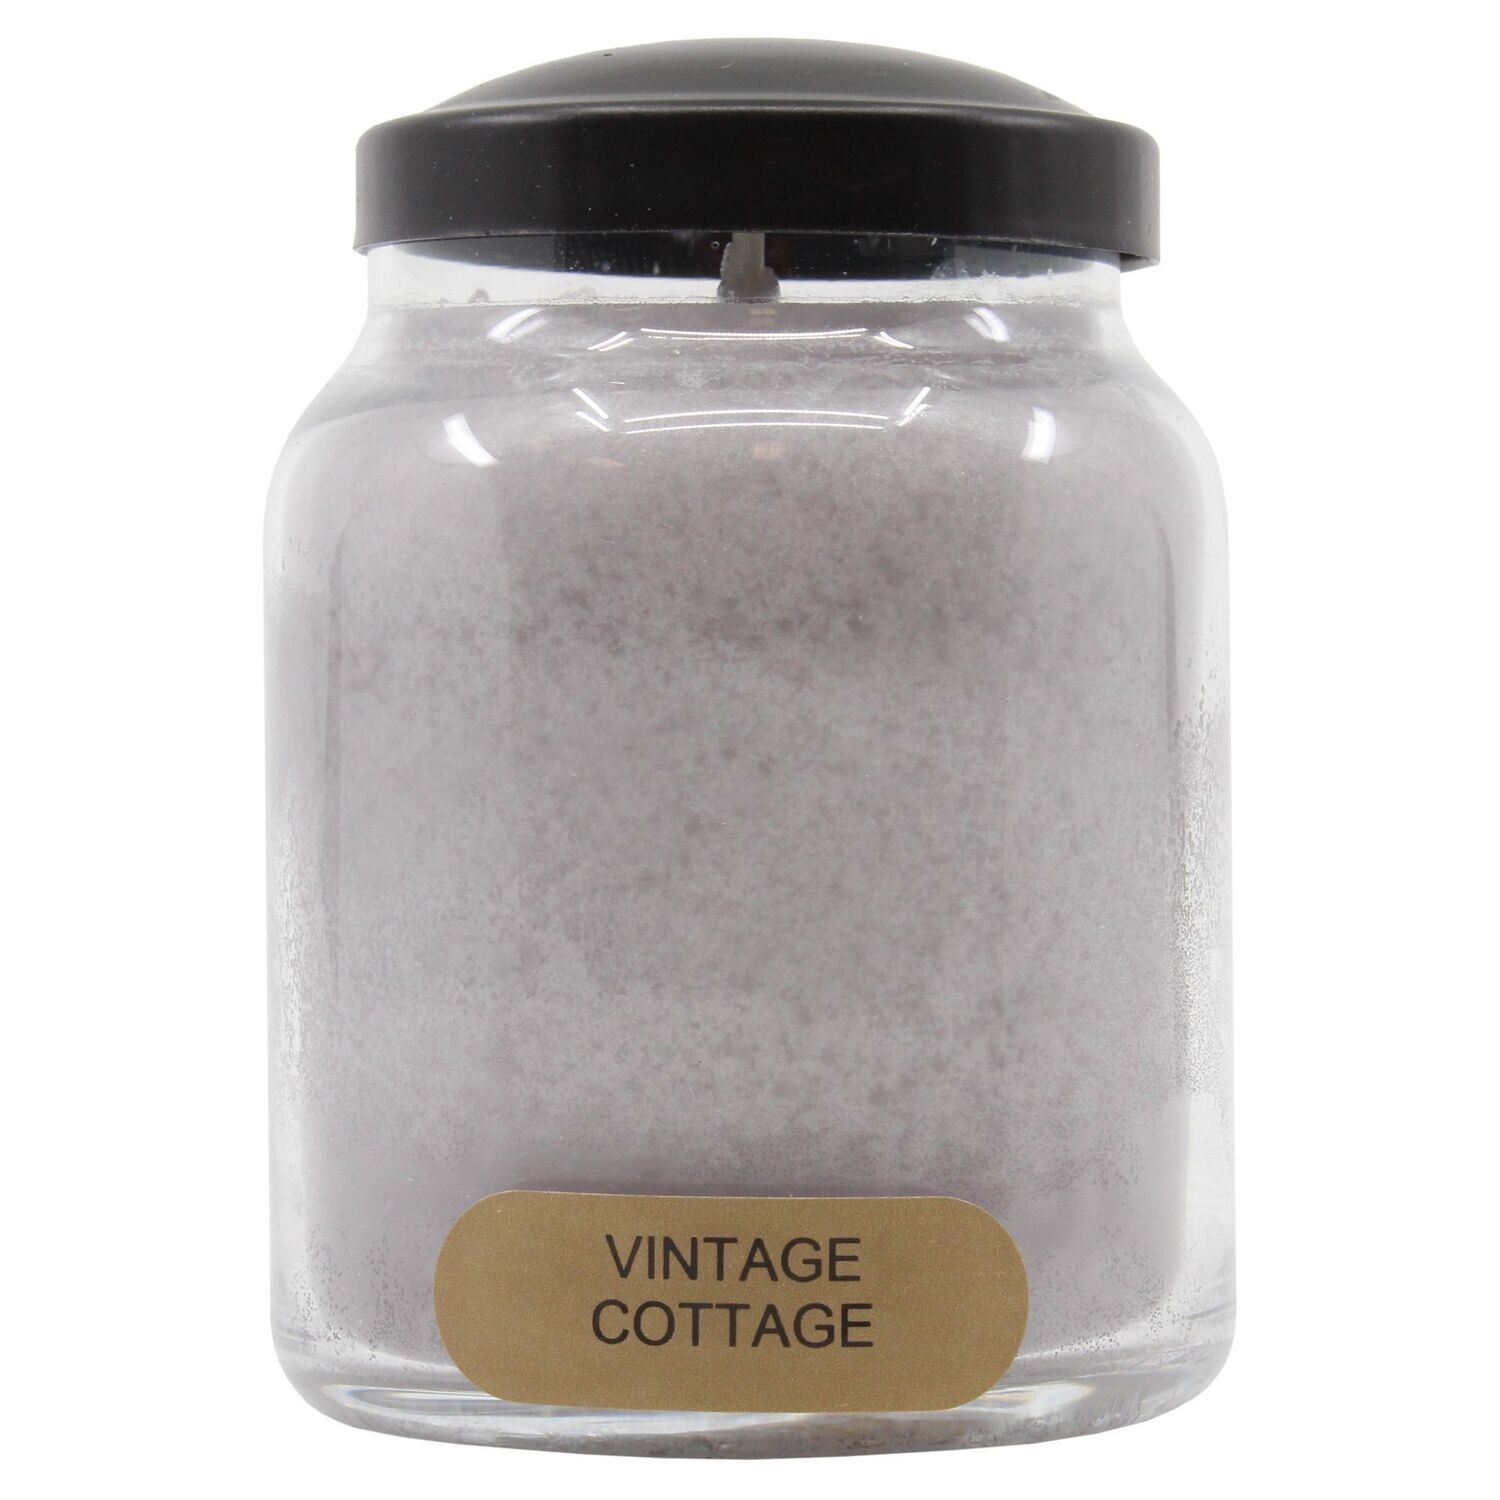 Vintage Cottage - Baby Jar - 6 oz - Keepers of the Light Candle